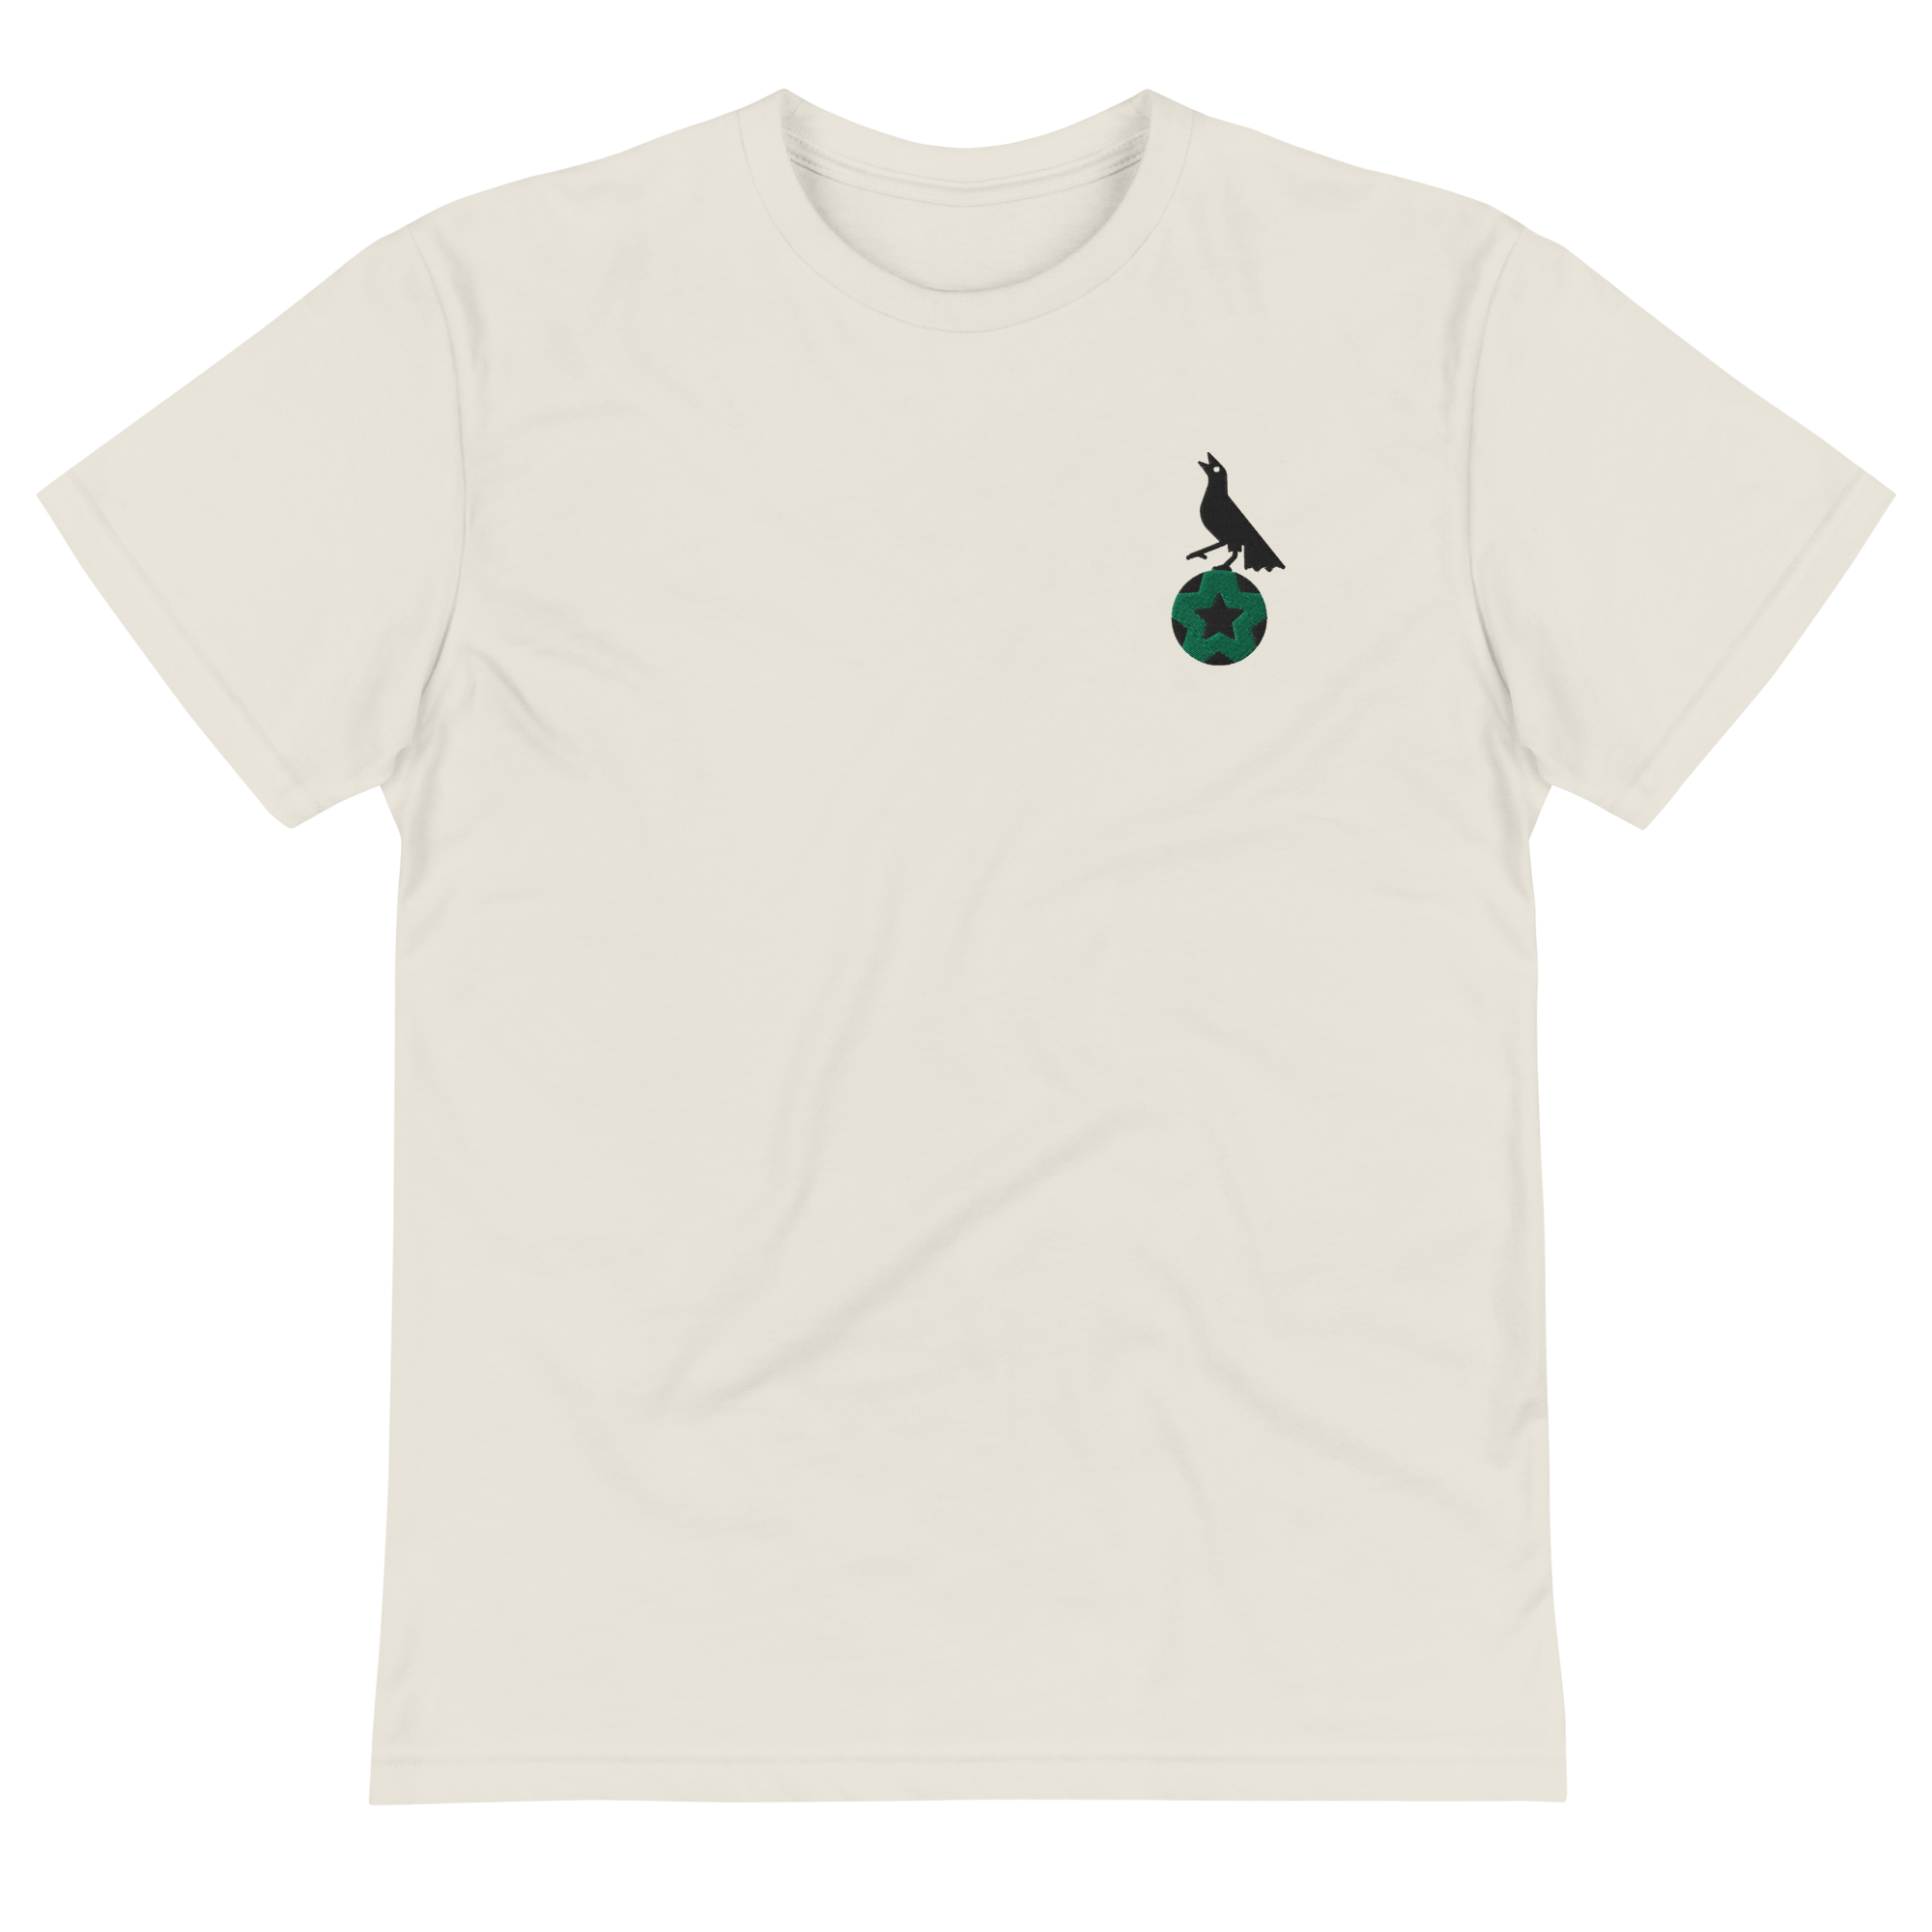 ATX Grackle Cream Embroidered T-Shirt